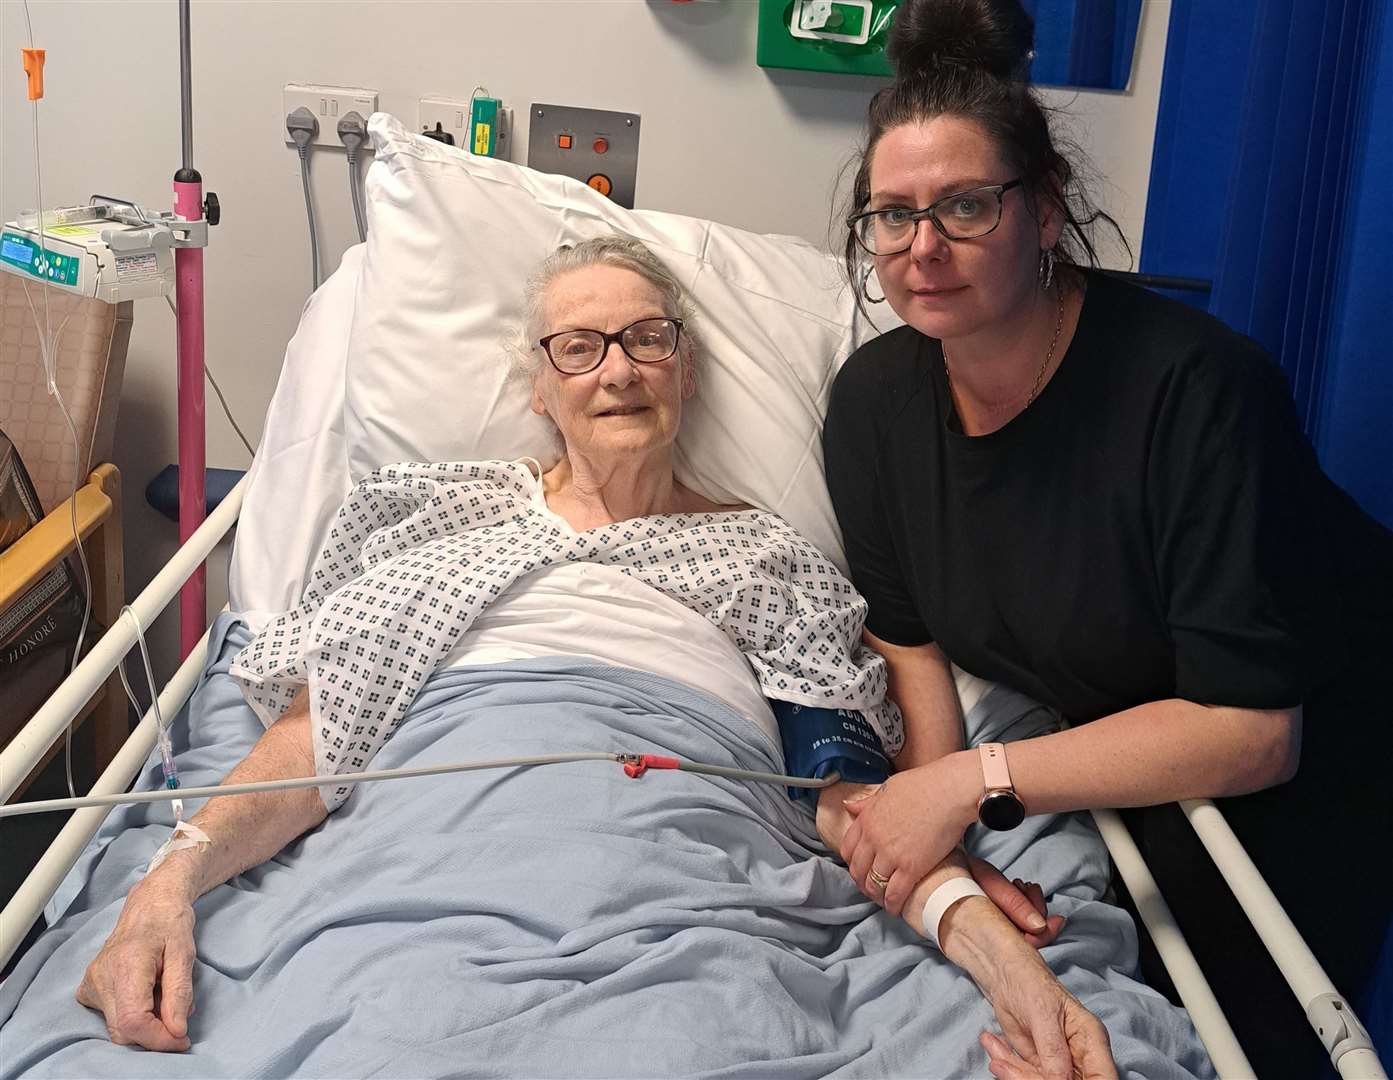 Gravesend nan Margaret Medhurst in hospital with her granddaughter Kimberley Bracey who has raised complaints about her care. Photo: Family release